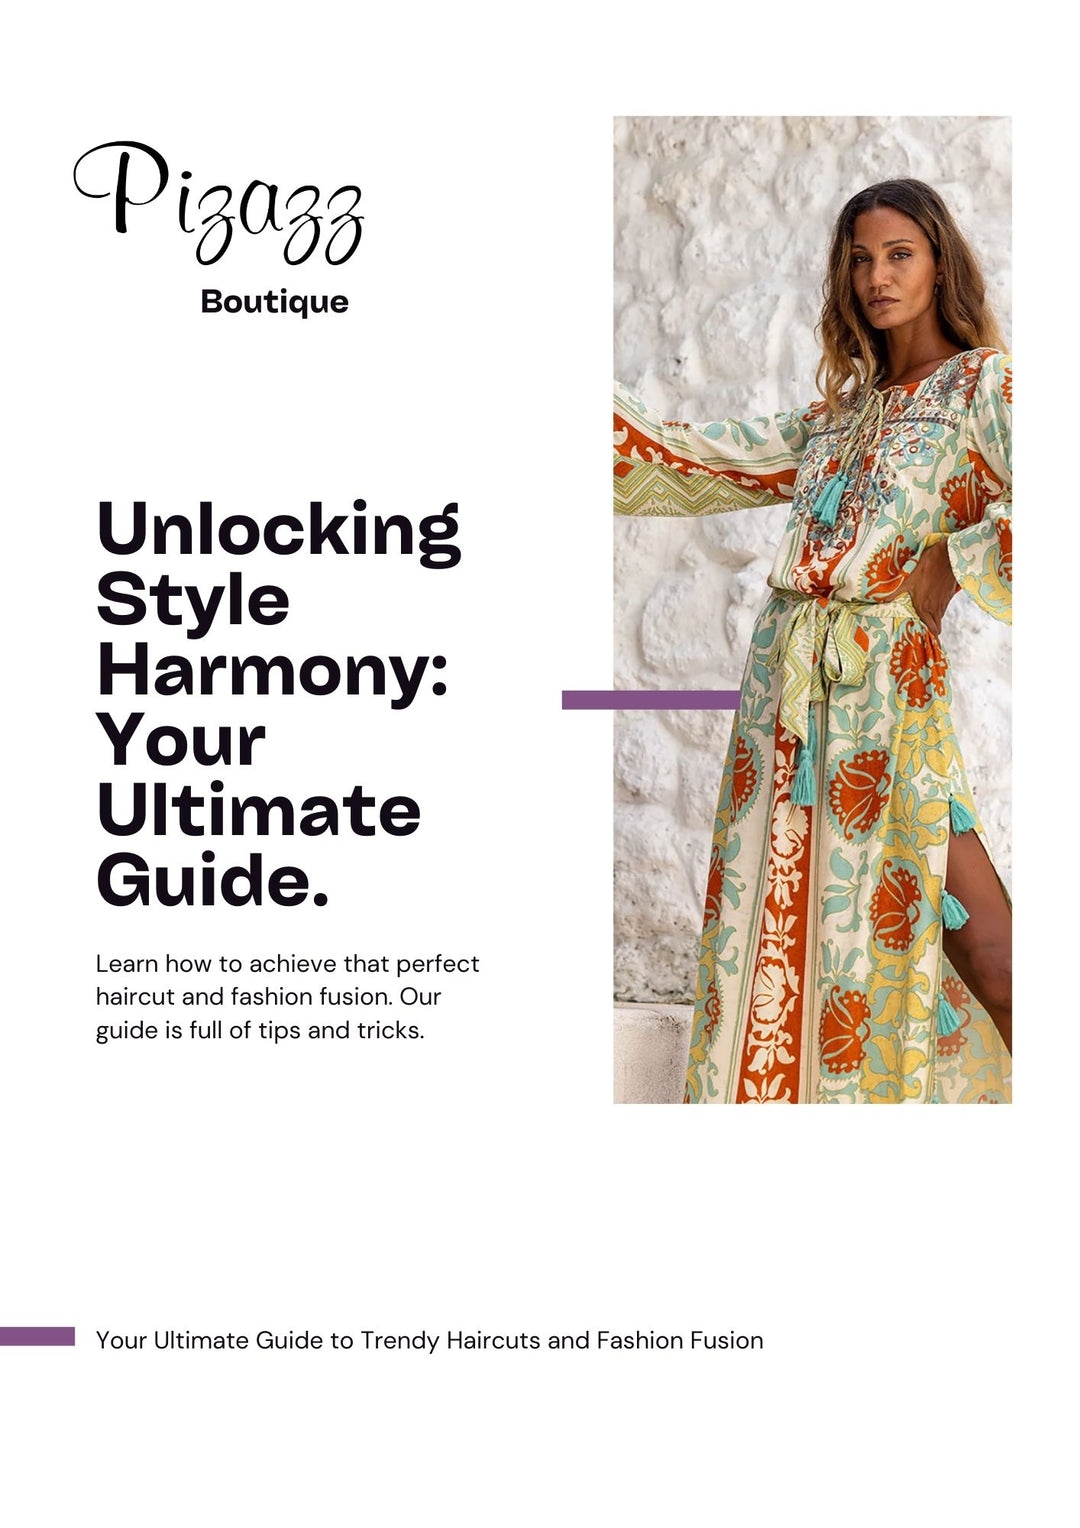 Blog cover for unlocking your style harmony between hair and fashion